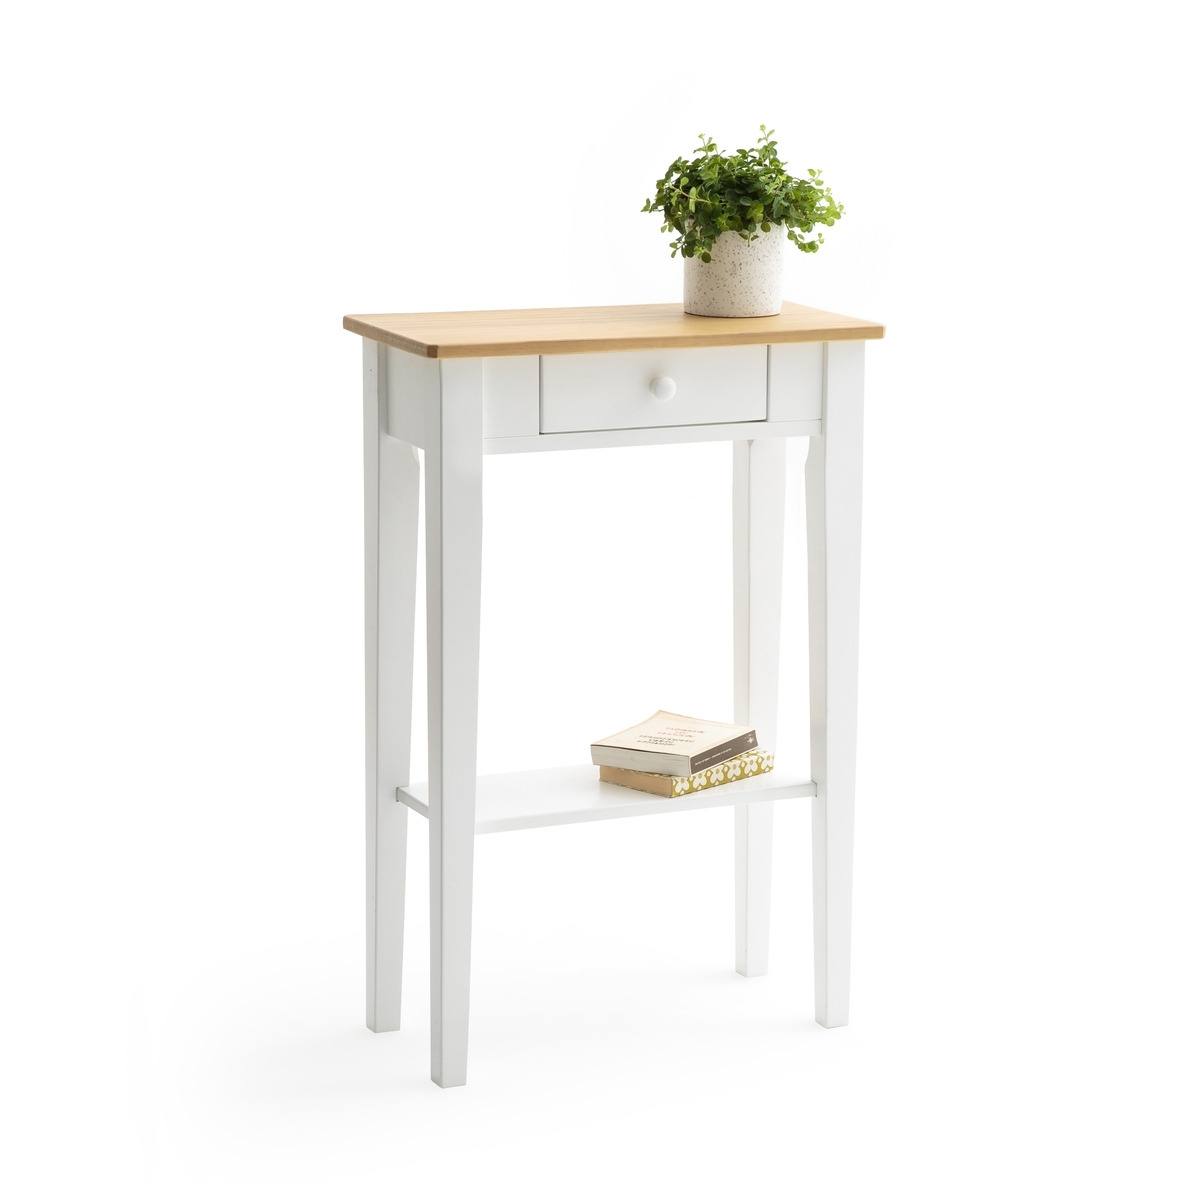 Alvina Solid Pine 1-Drawer Console Table - image 1